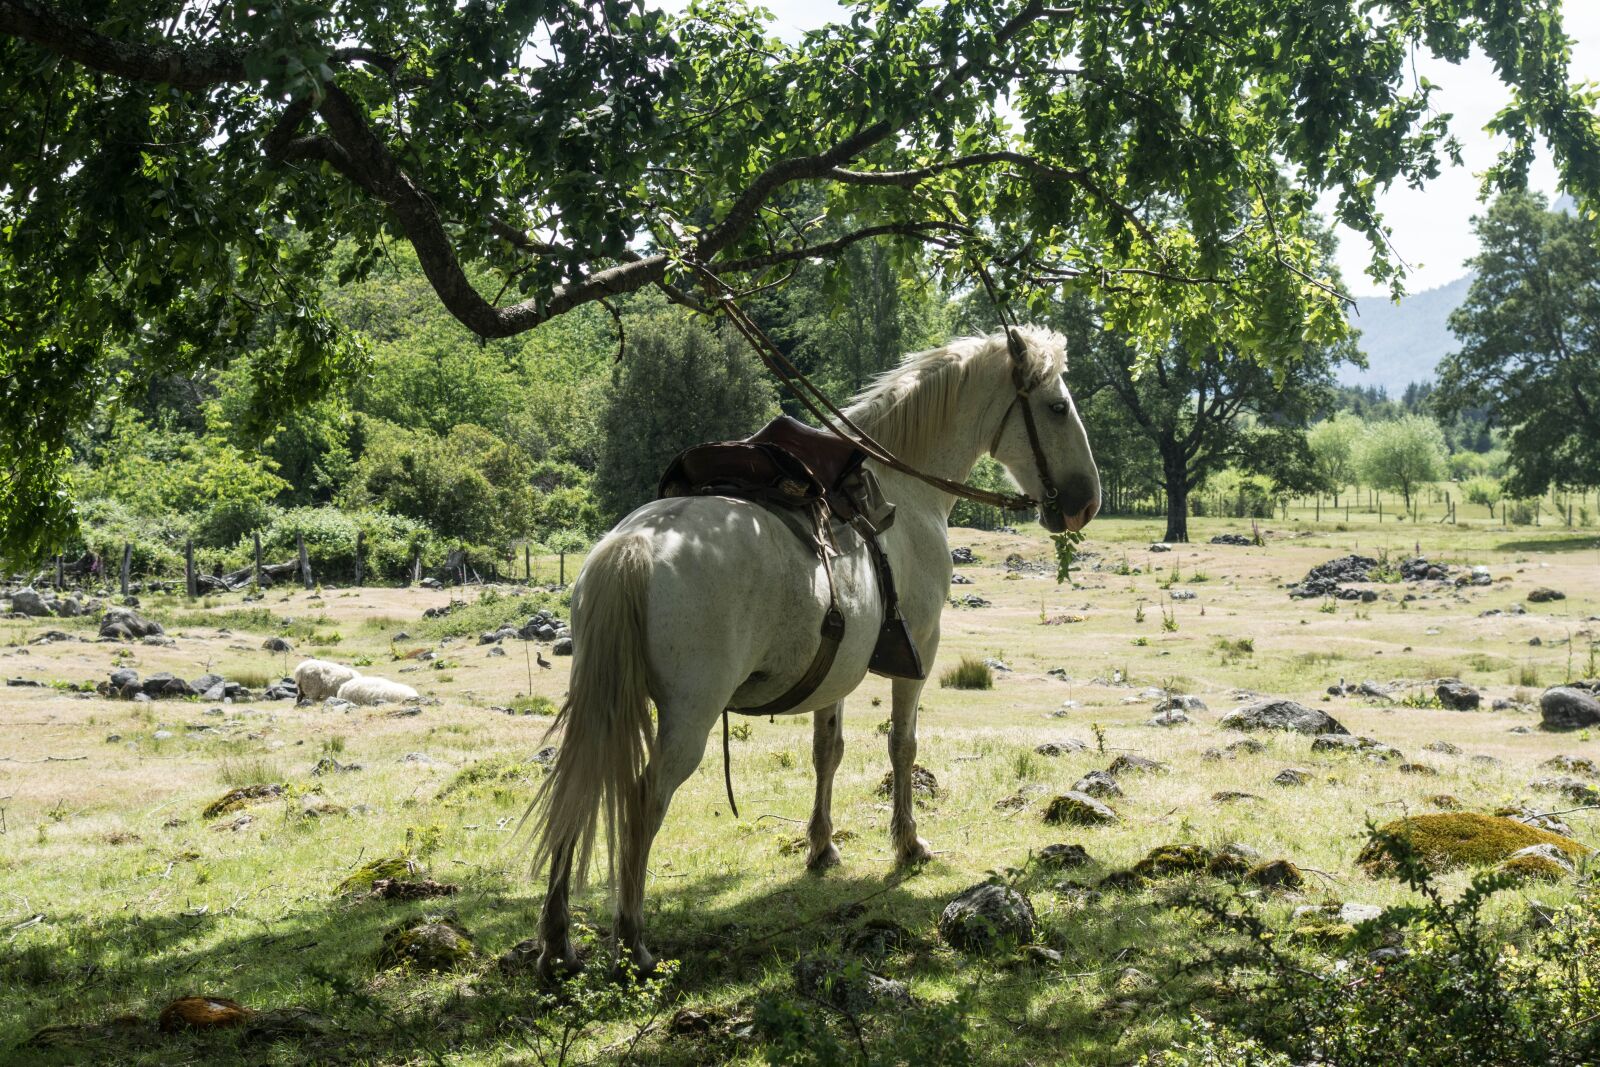 Sony Cyber-shot DSC-RX100 II sample photo. Horse, white horse, riding photography